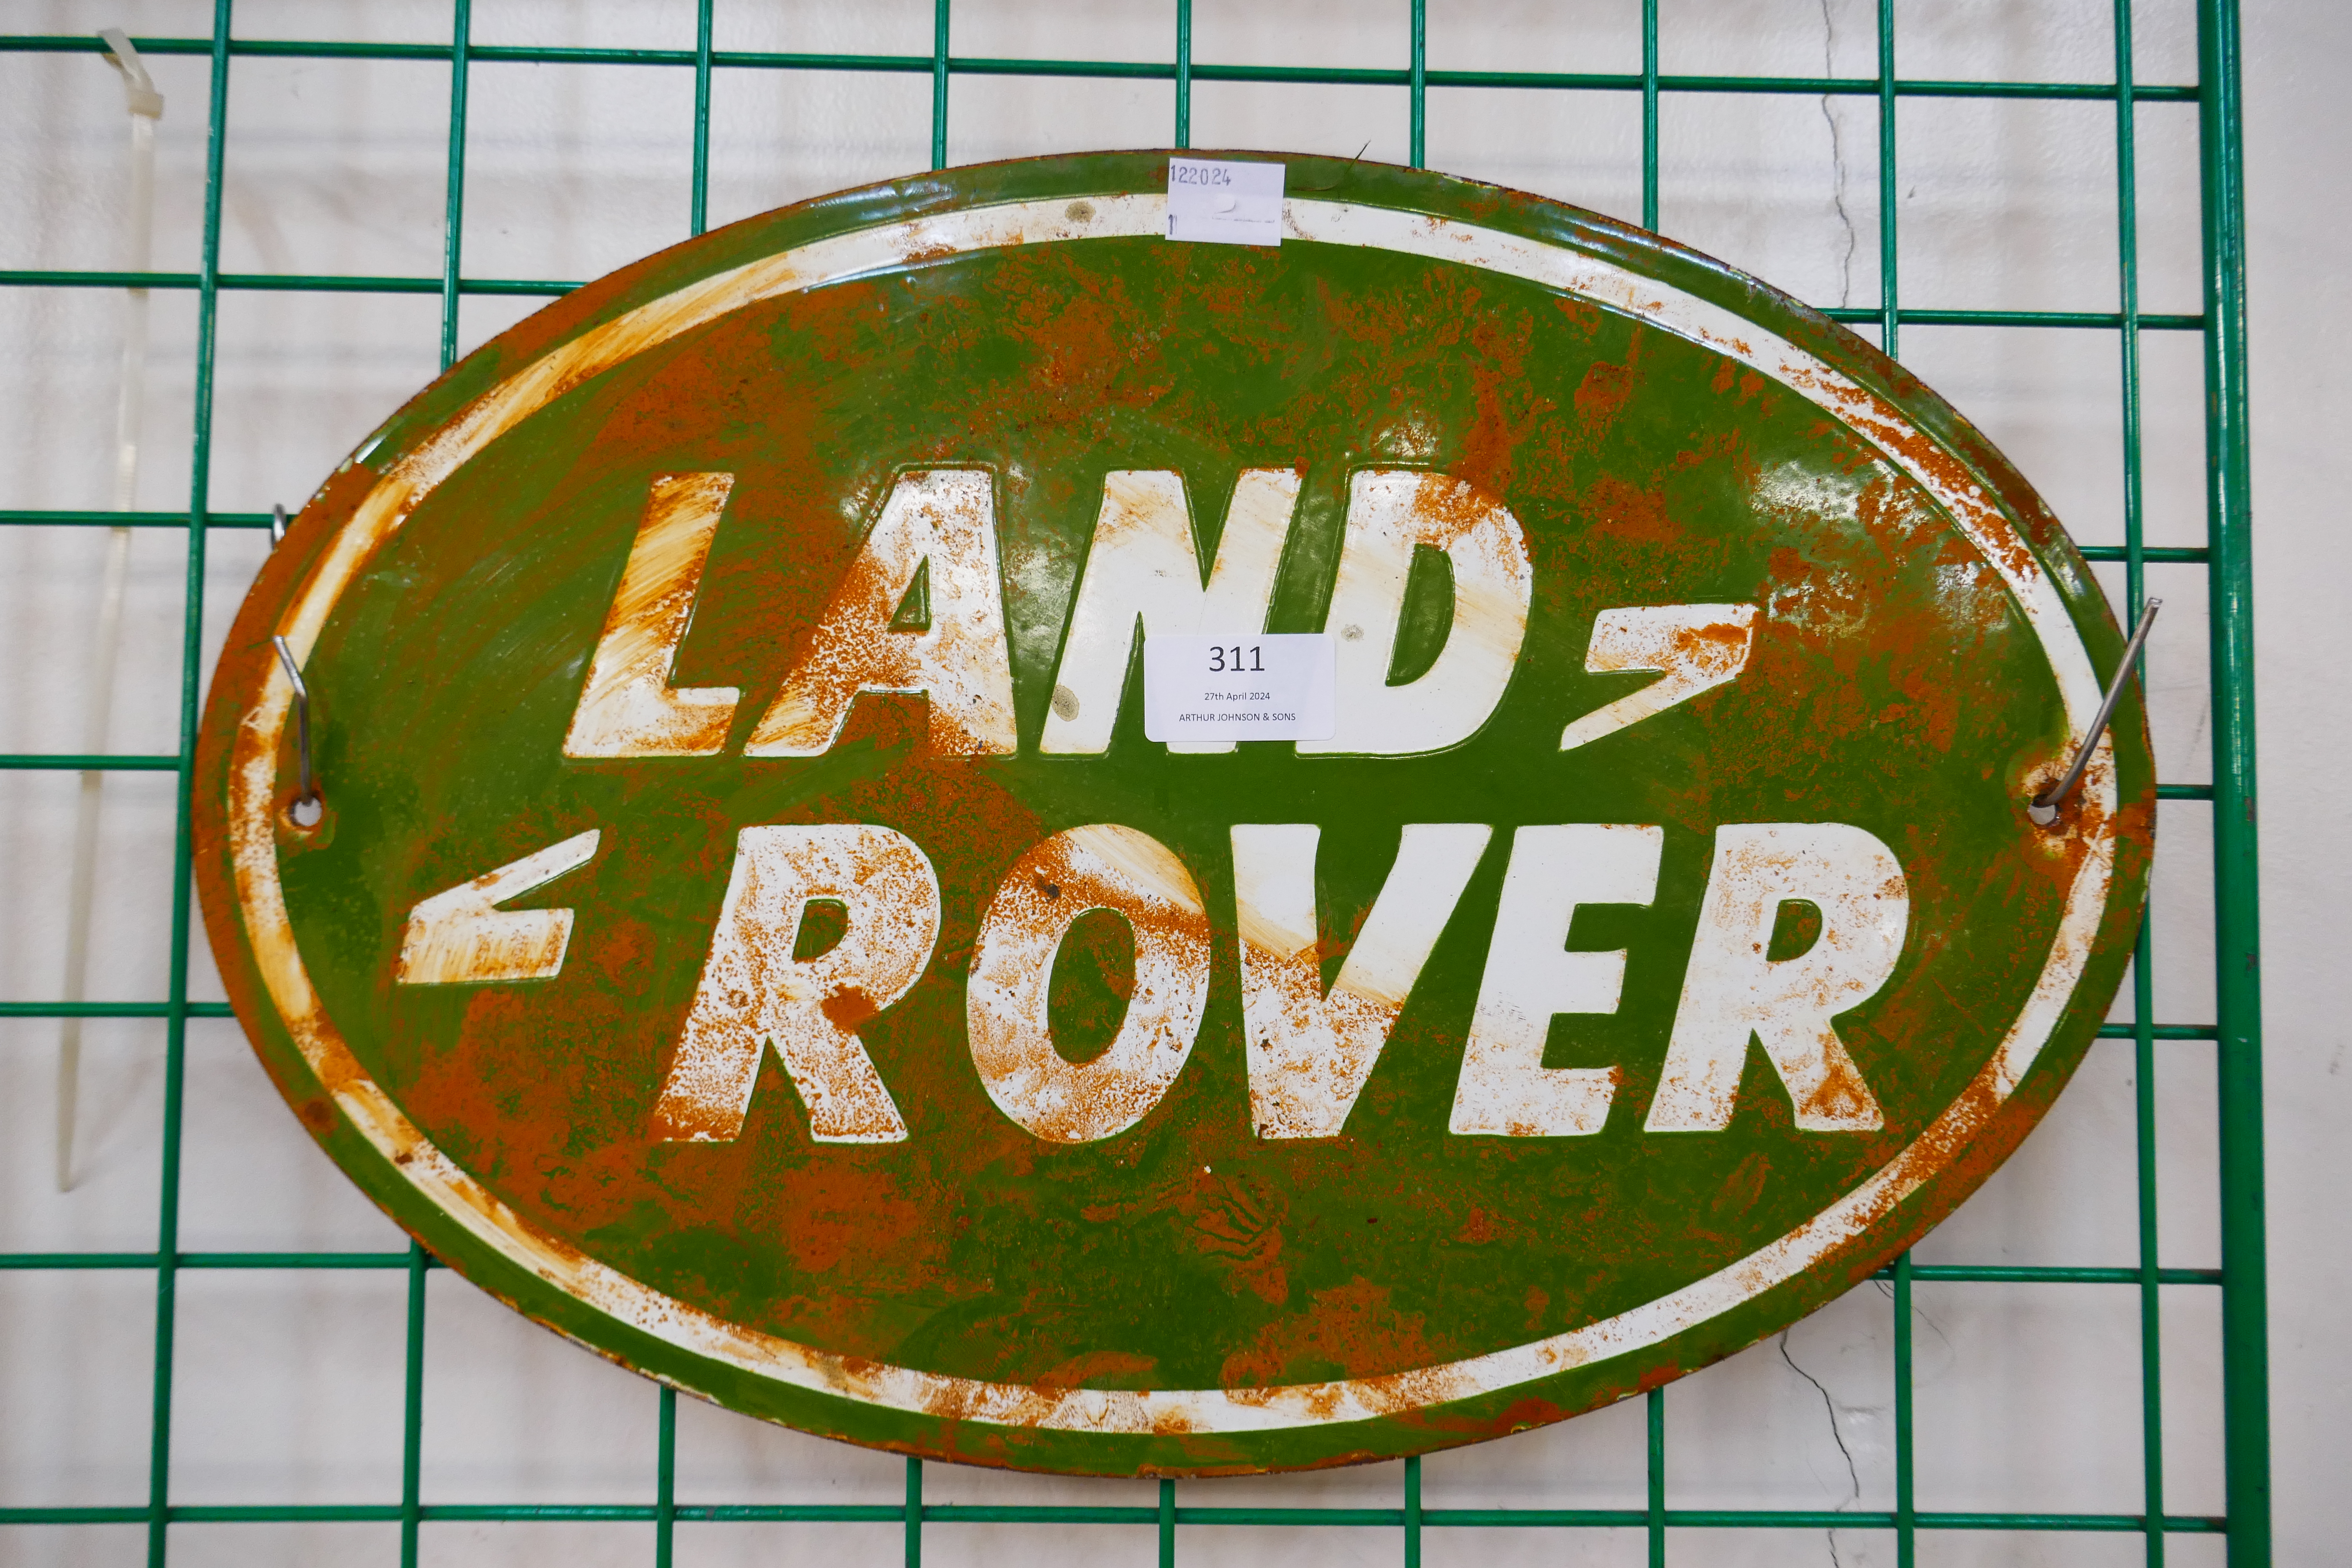 An enamelled metal Land Rover sign